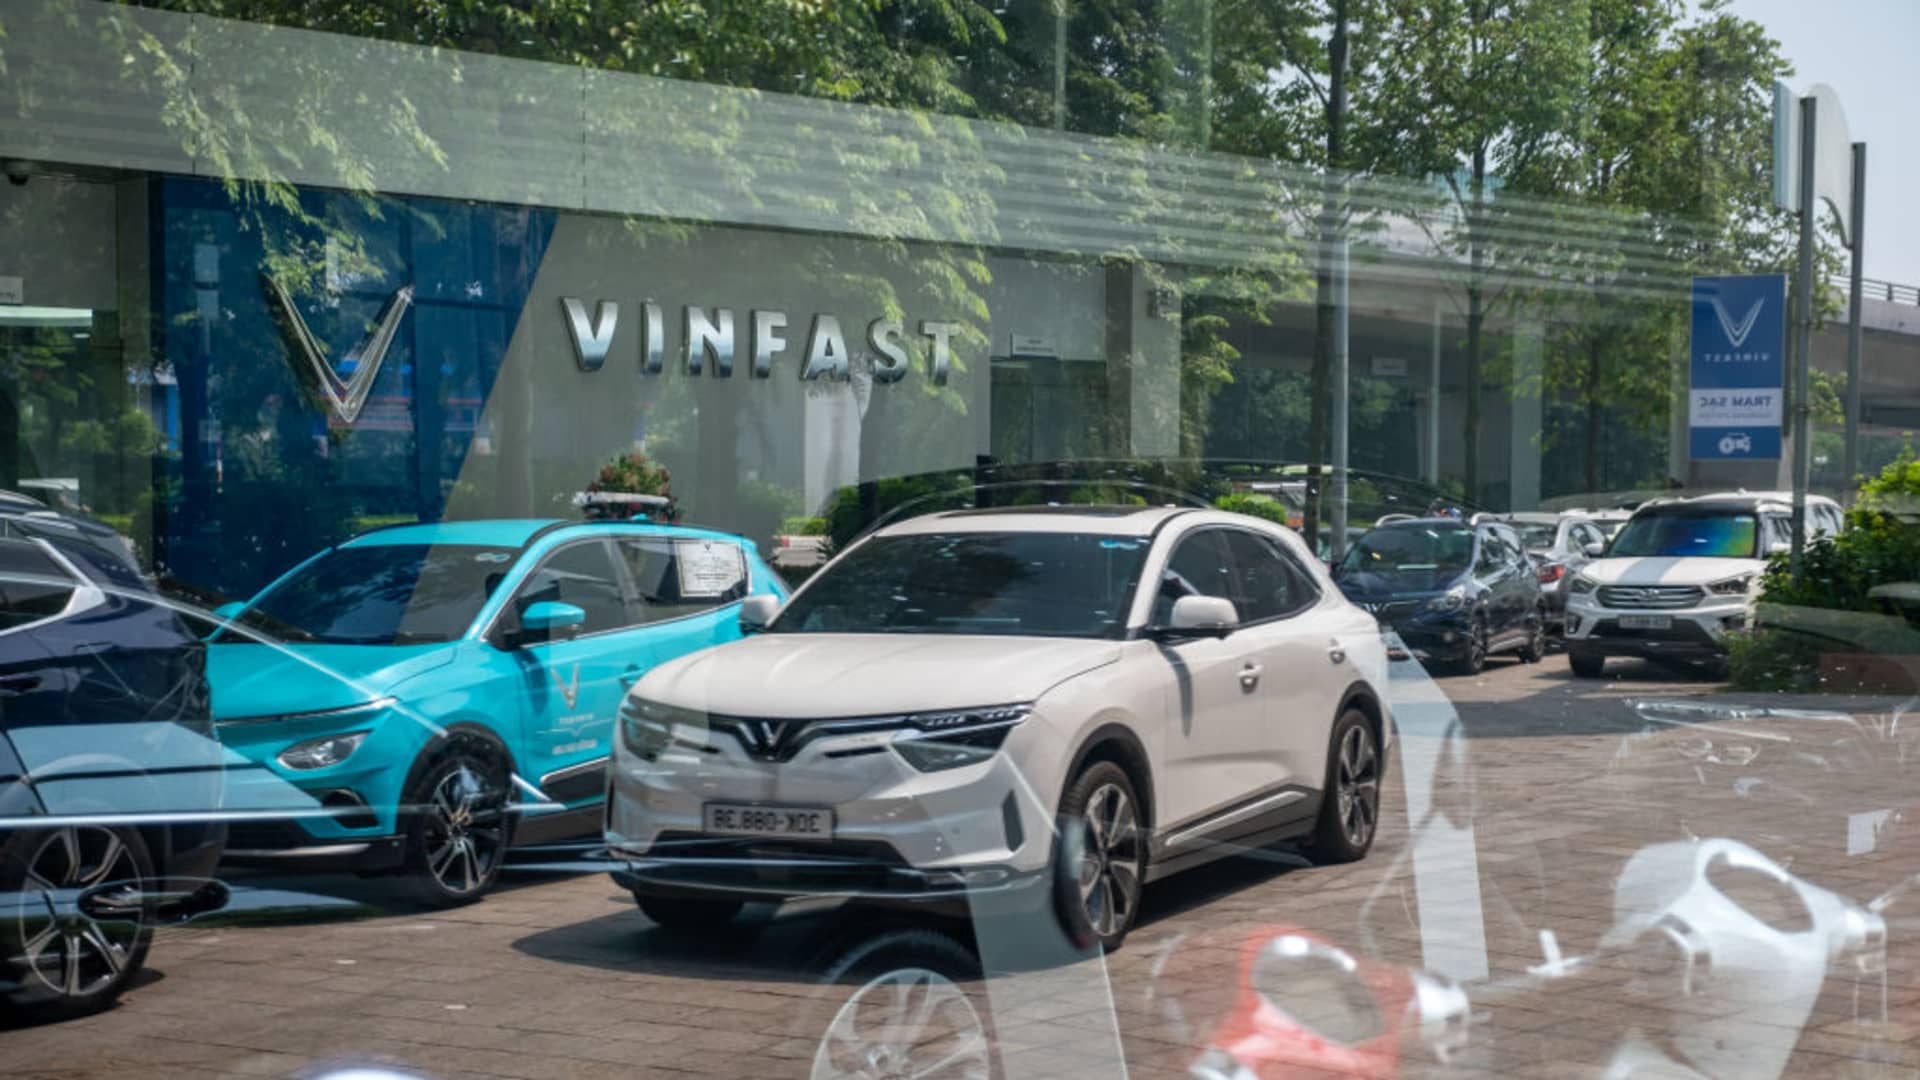 Vietnam electric car maker VinFast appoints its founder as CEO and replaces CFO